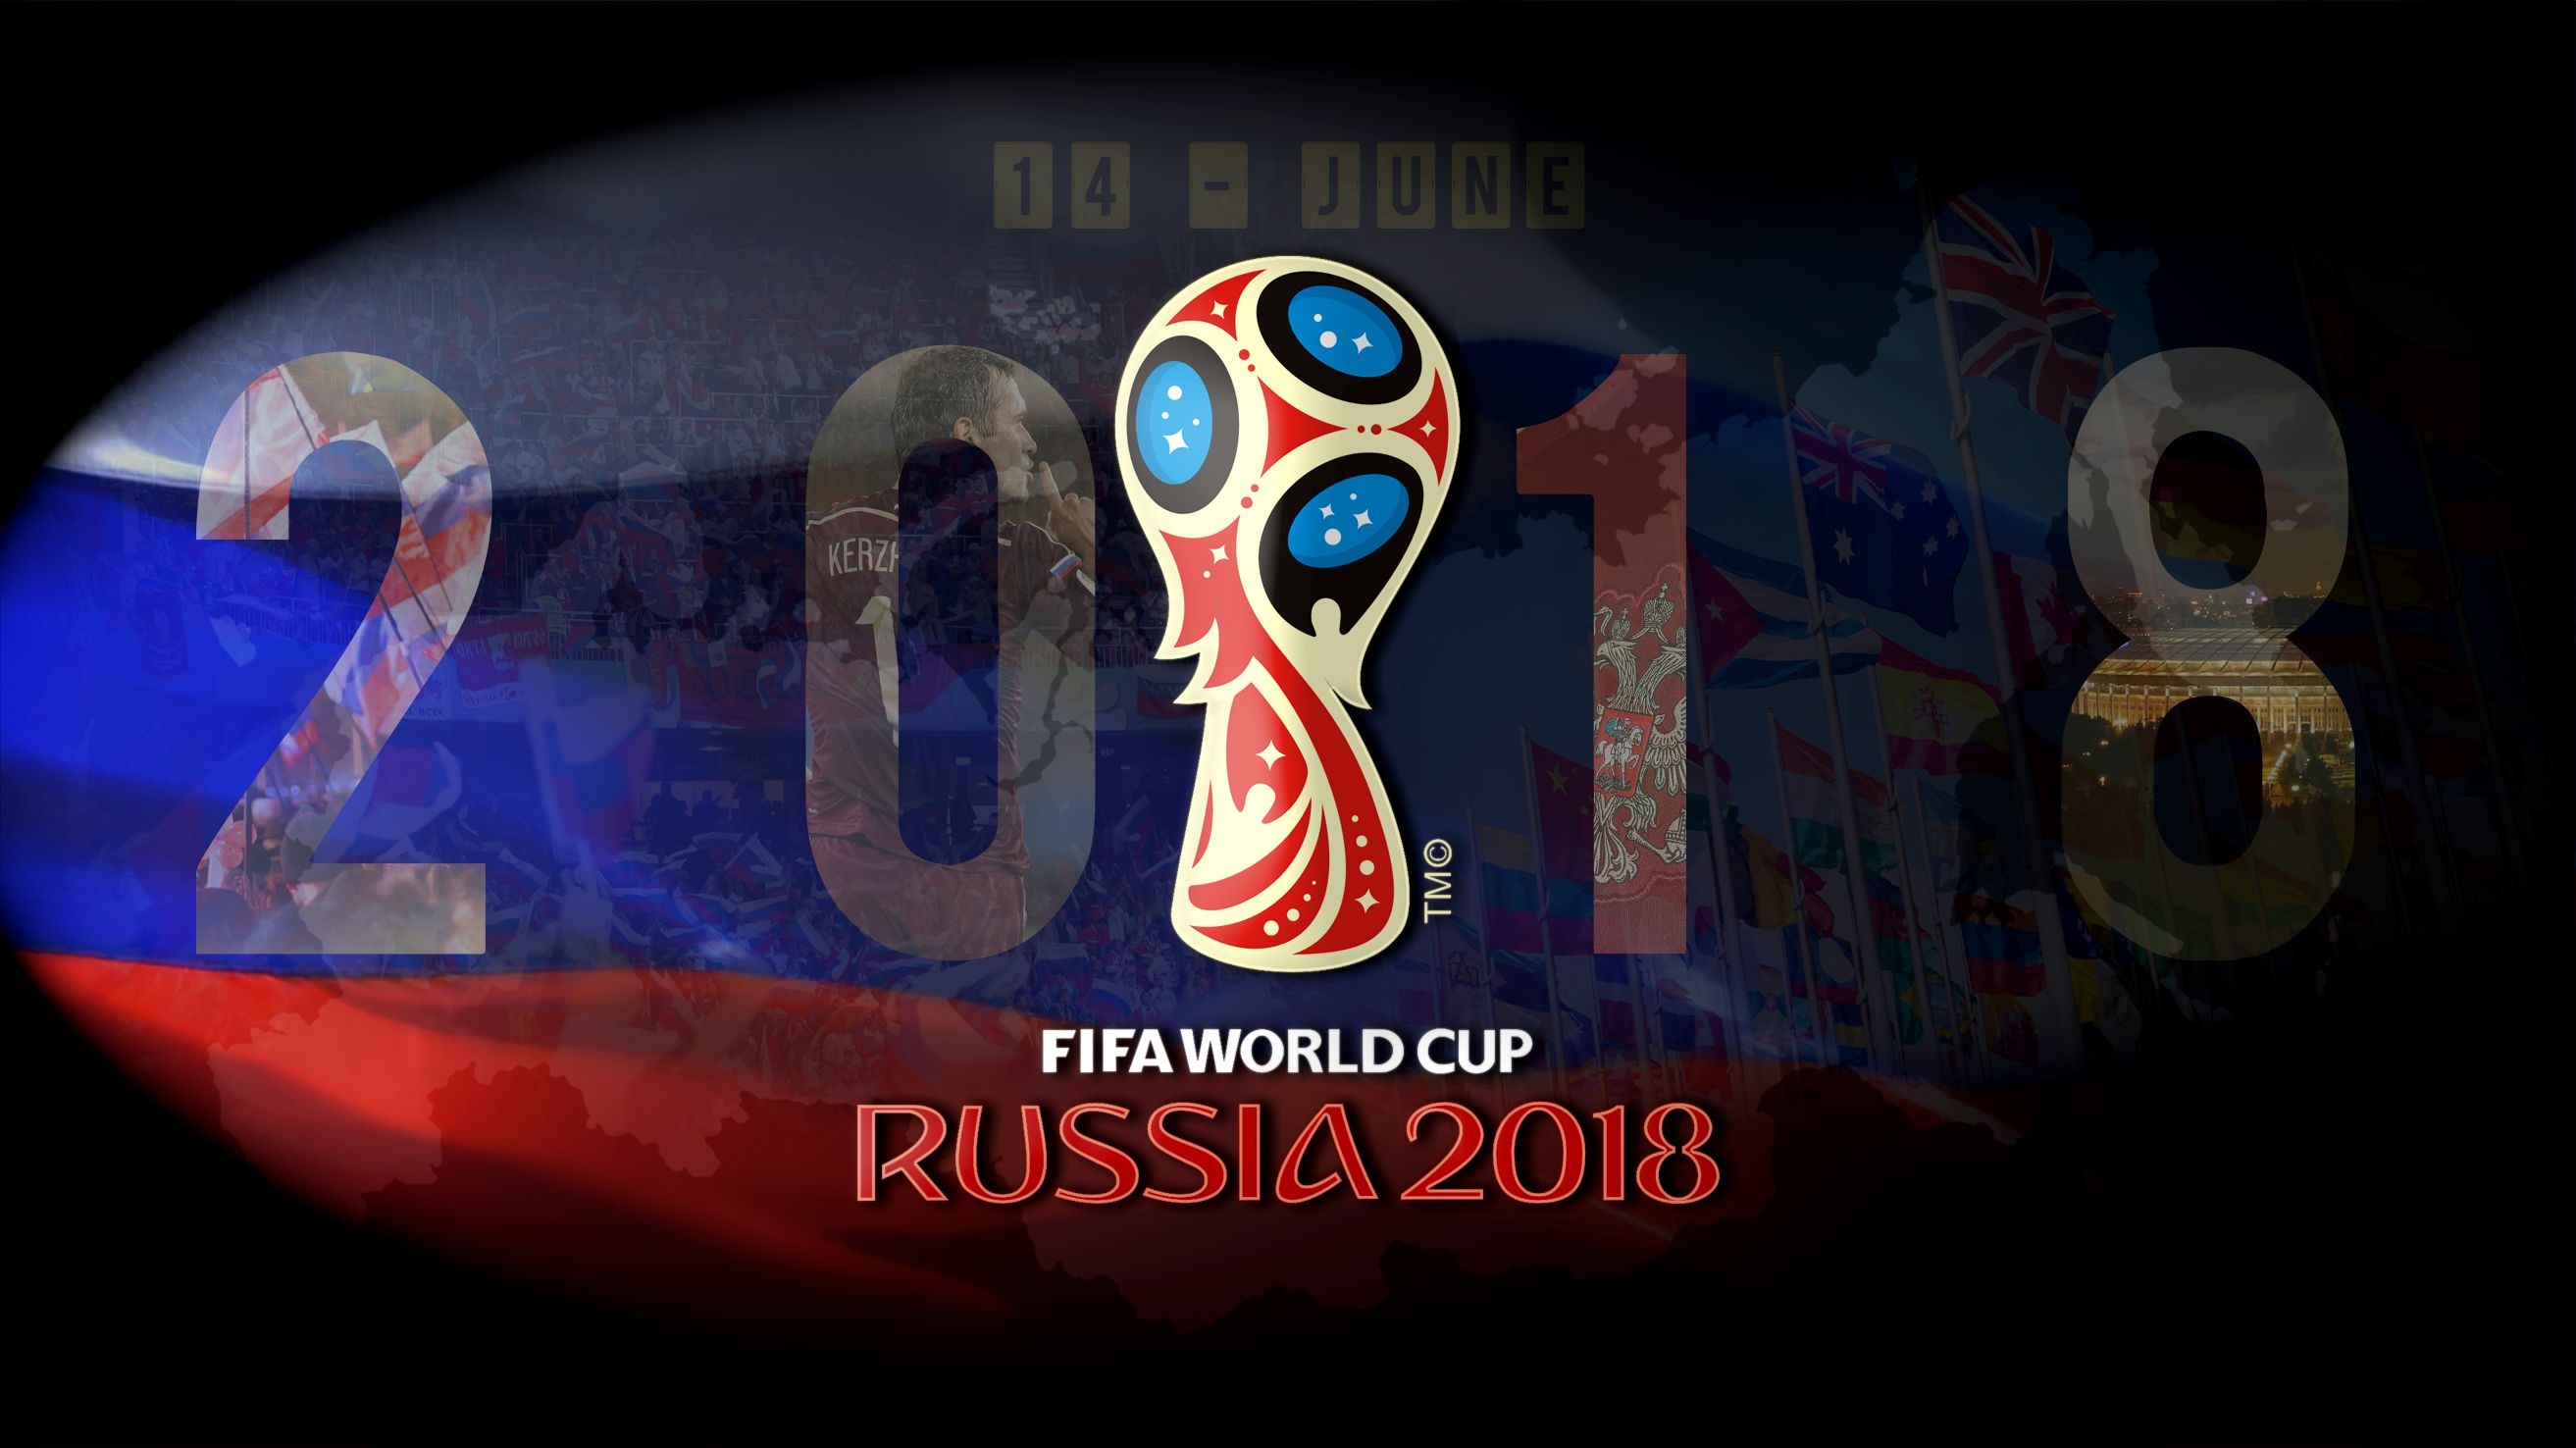 Russia-world cup russia 2018 background